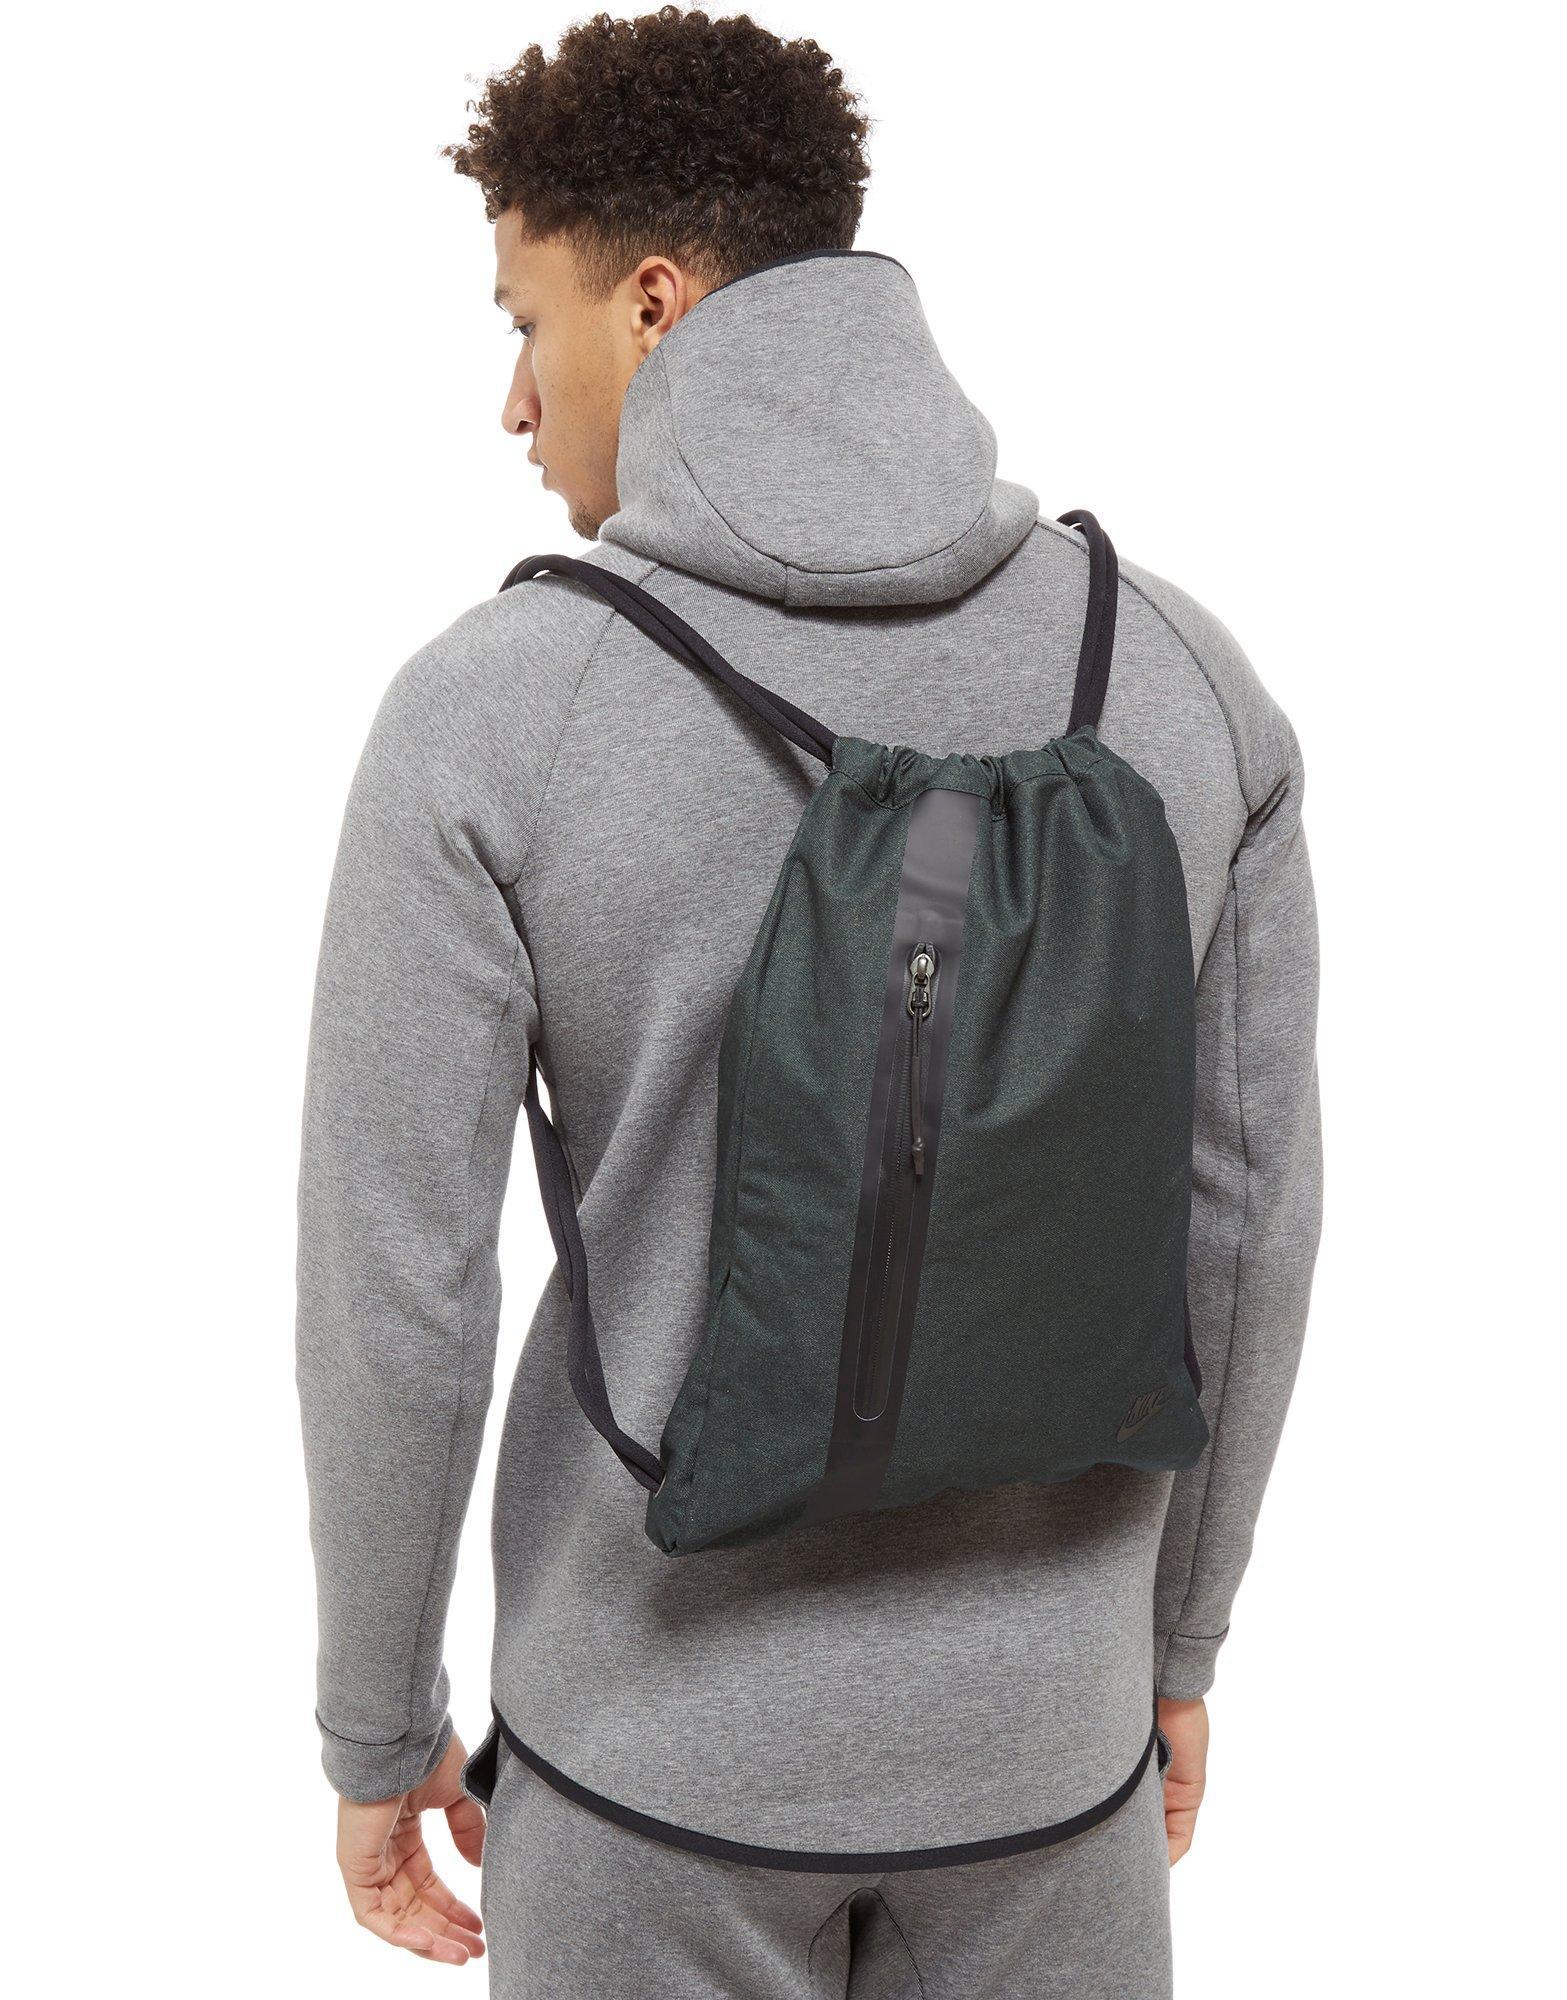 Nike Synthetic Tech Gym Sack in Green 